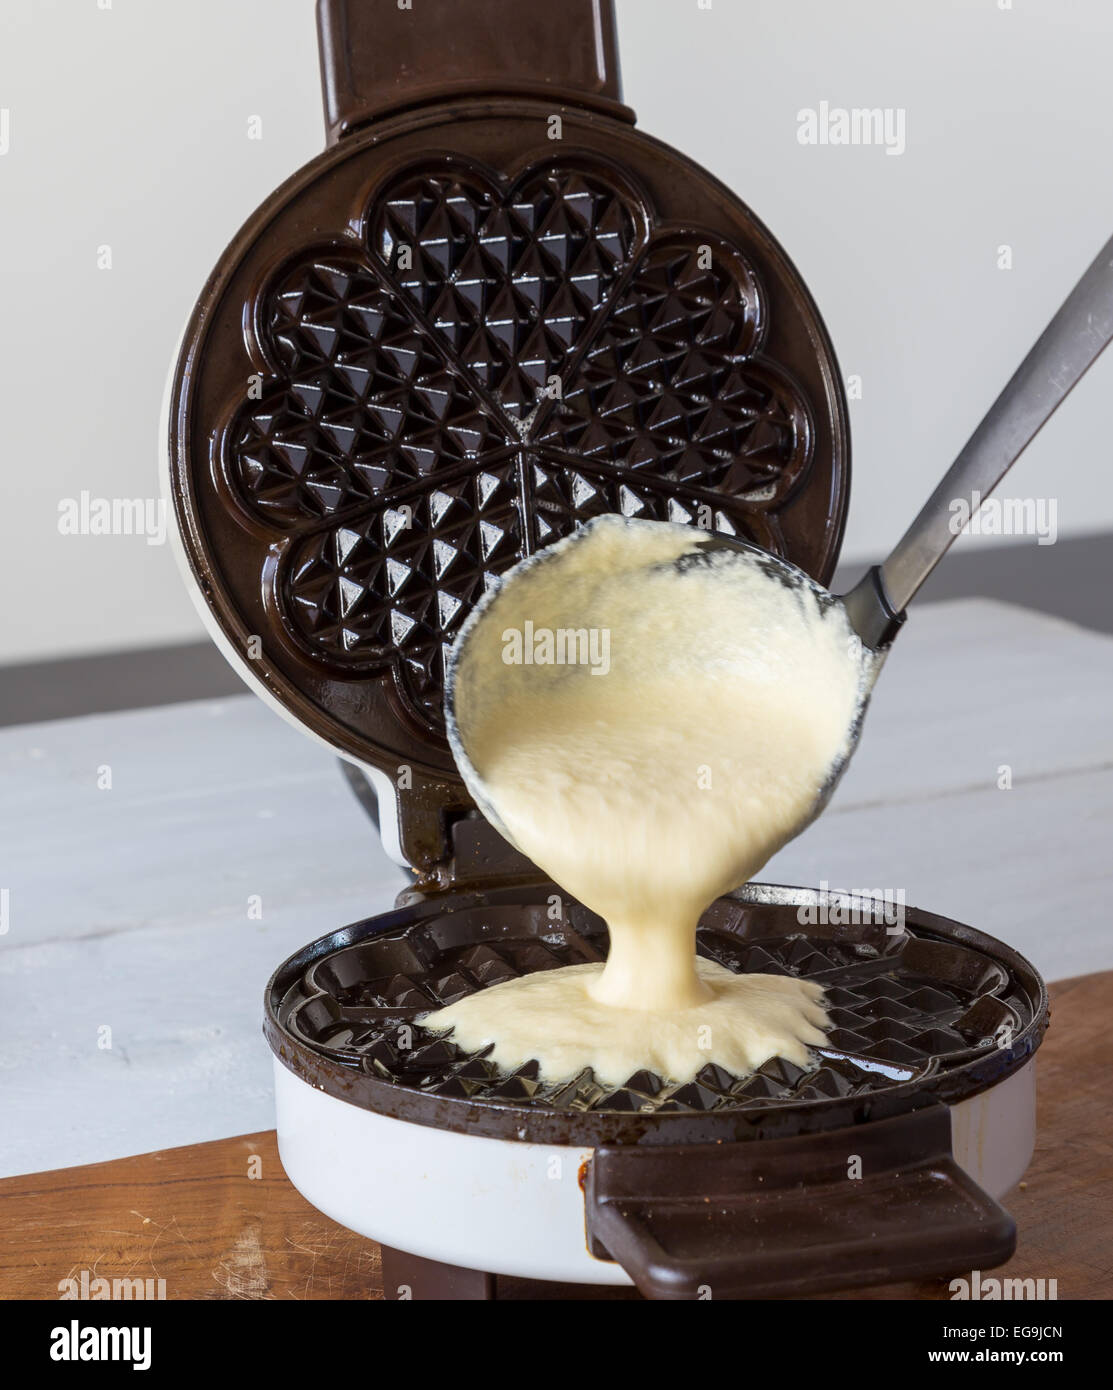 Homemade waffles are cooked in a waffle iron Stock Photo